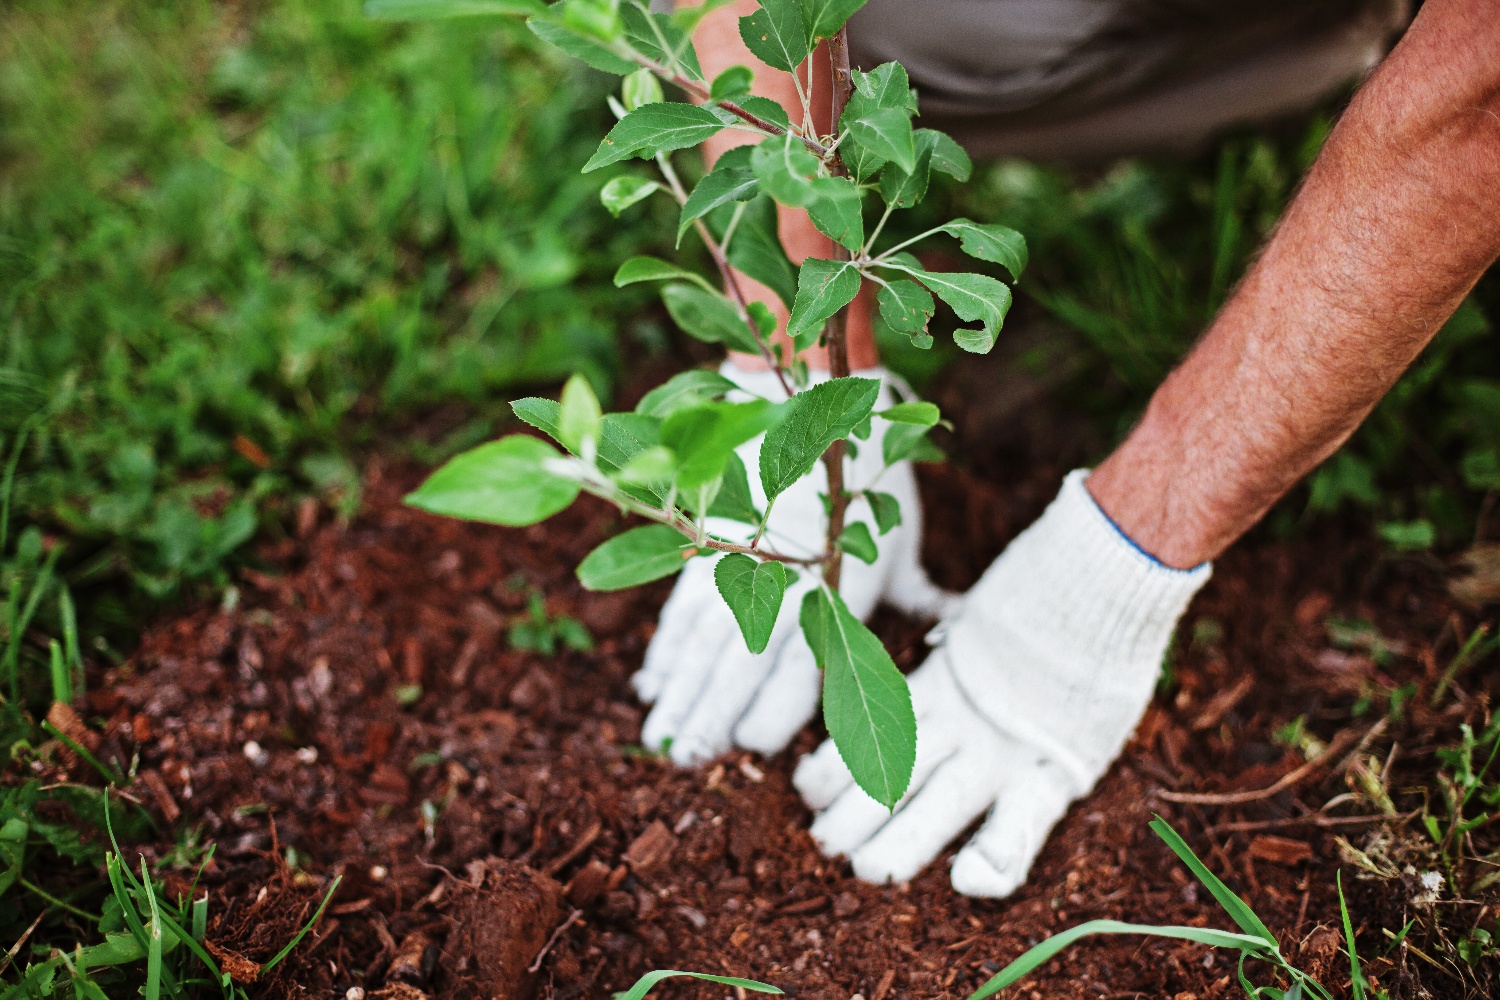 Planting a tree as an environmental offset